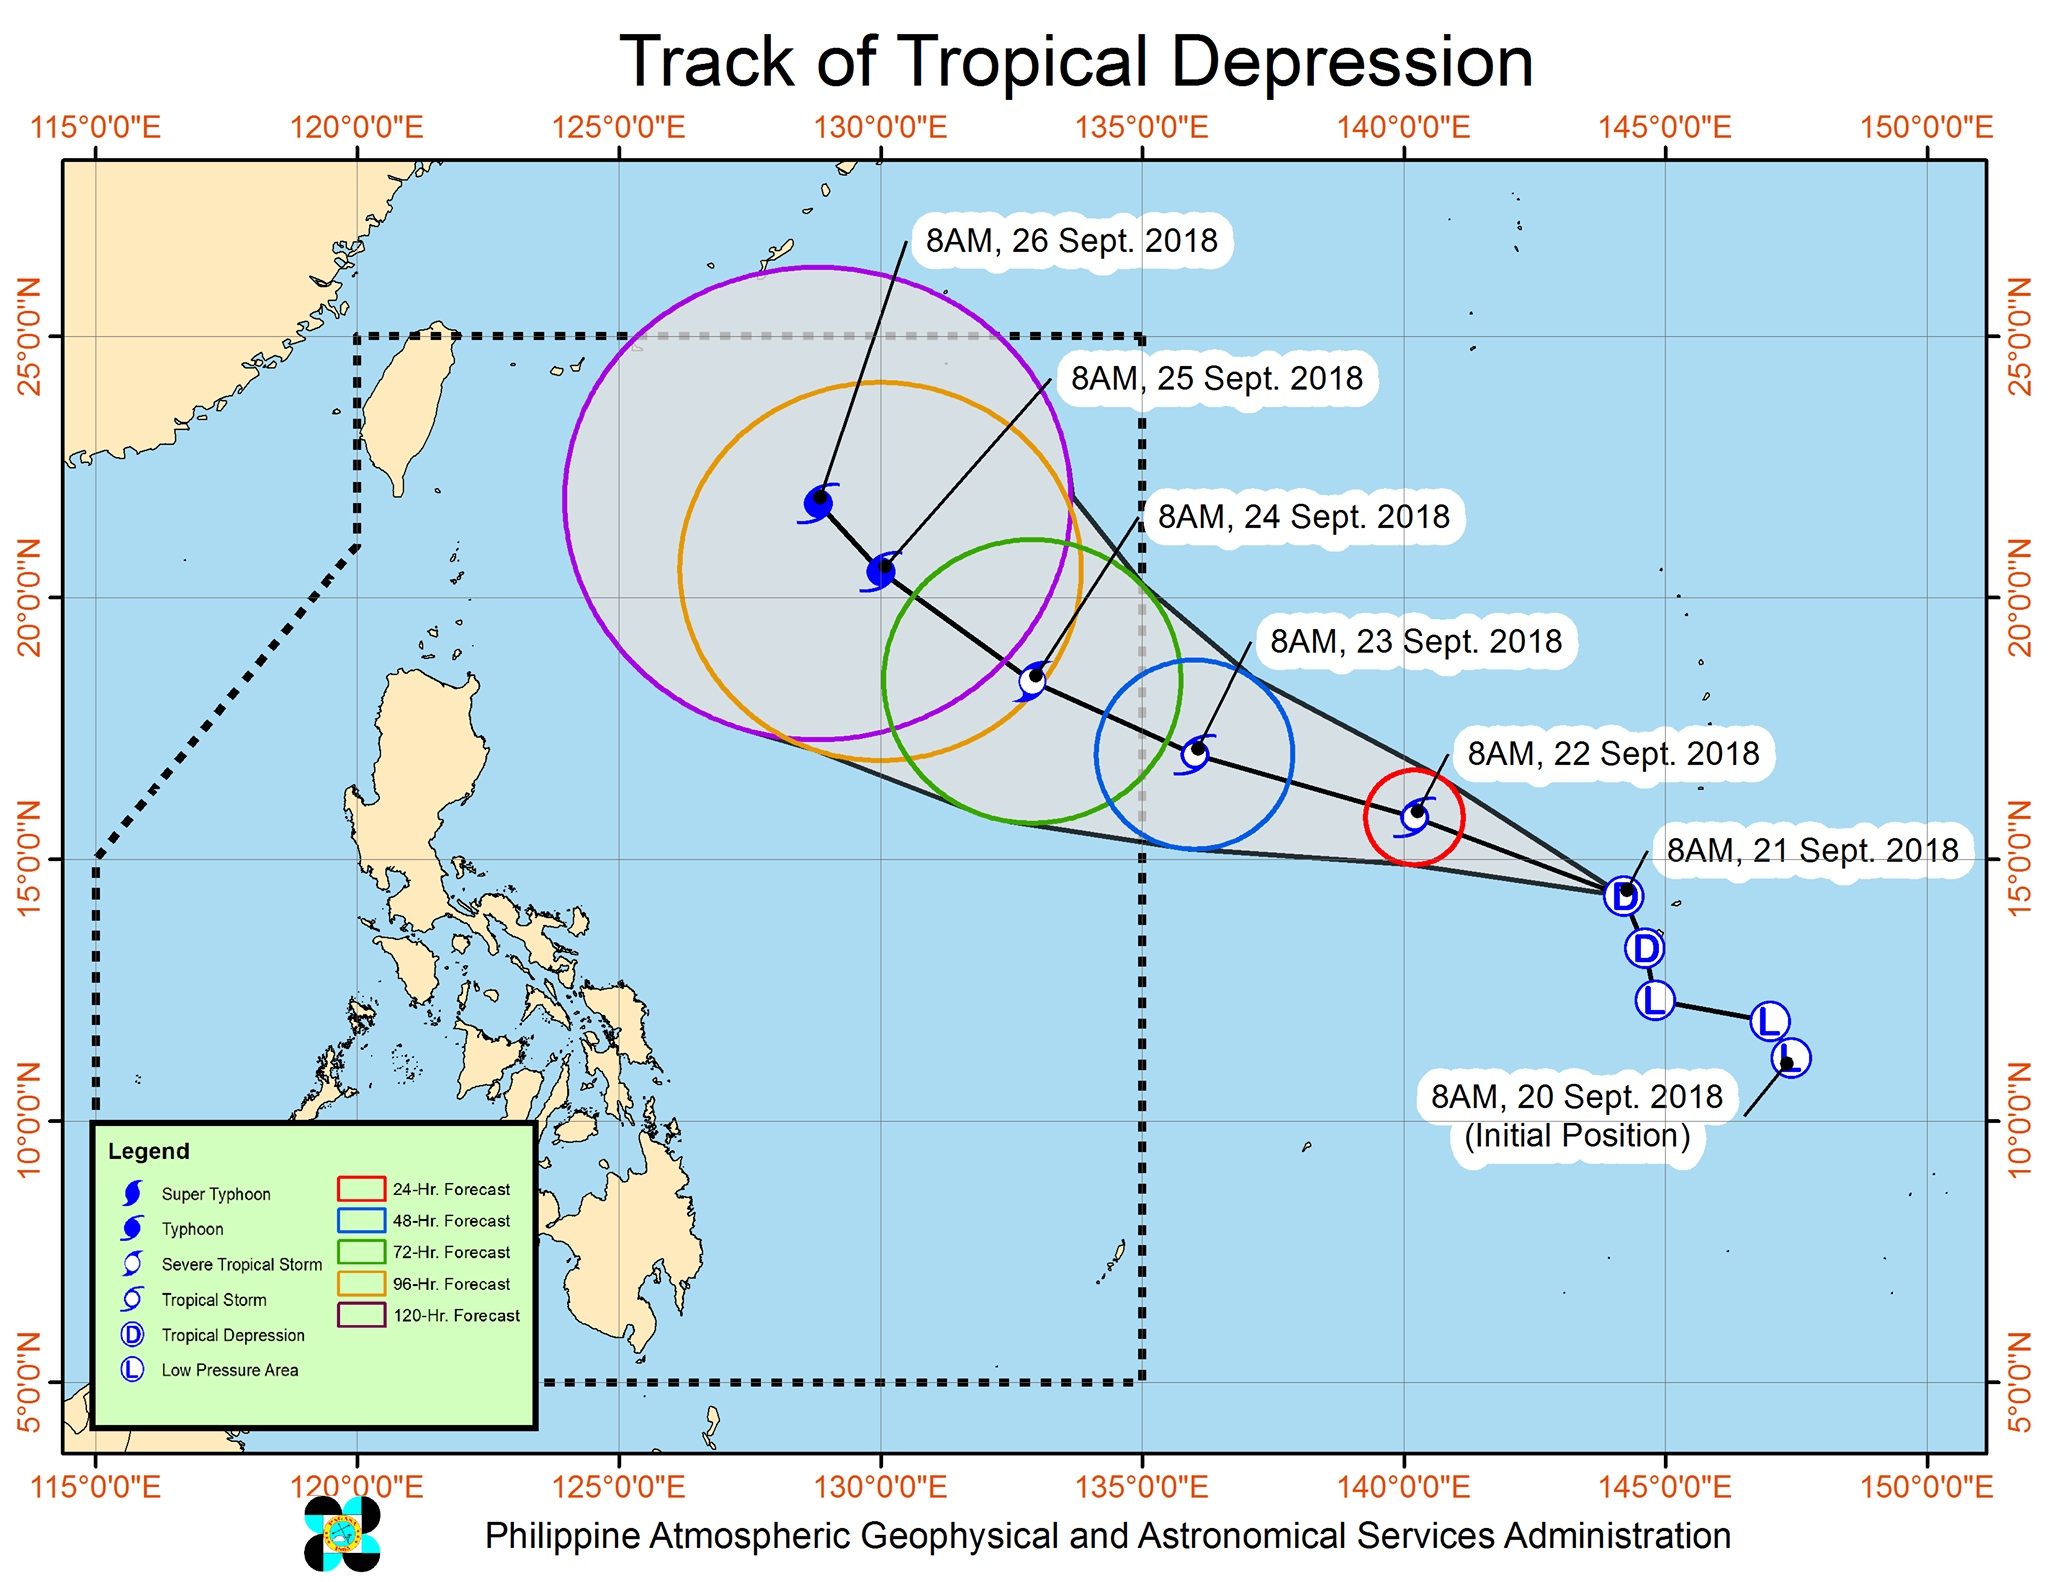 Forecast track of the tropical depression, which is still outside the Philippine Area of Responsibility, as of September 21, 2018, 11 am. Image from PAGASA 